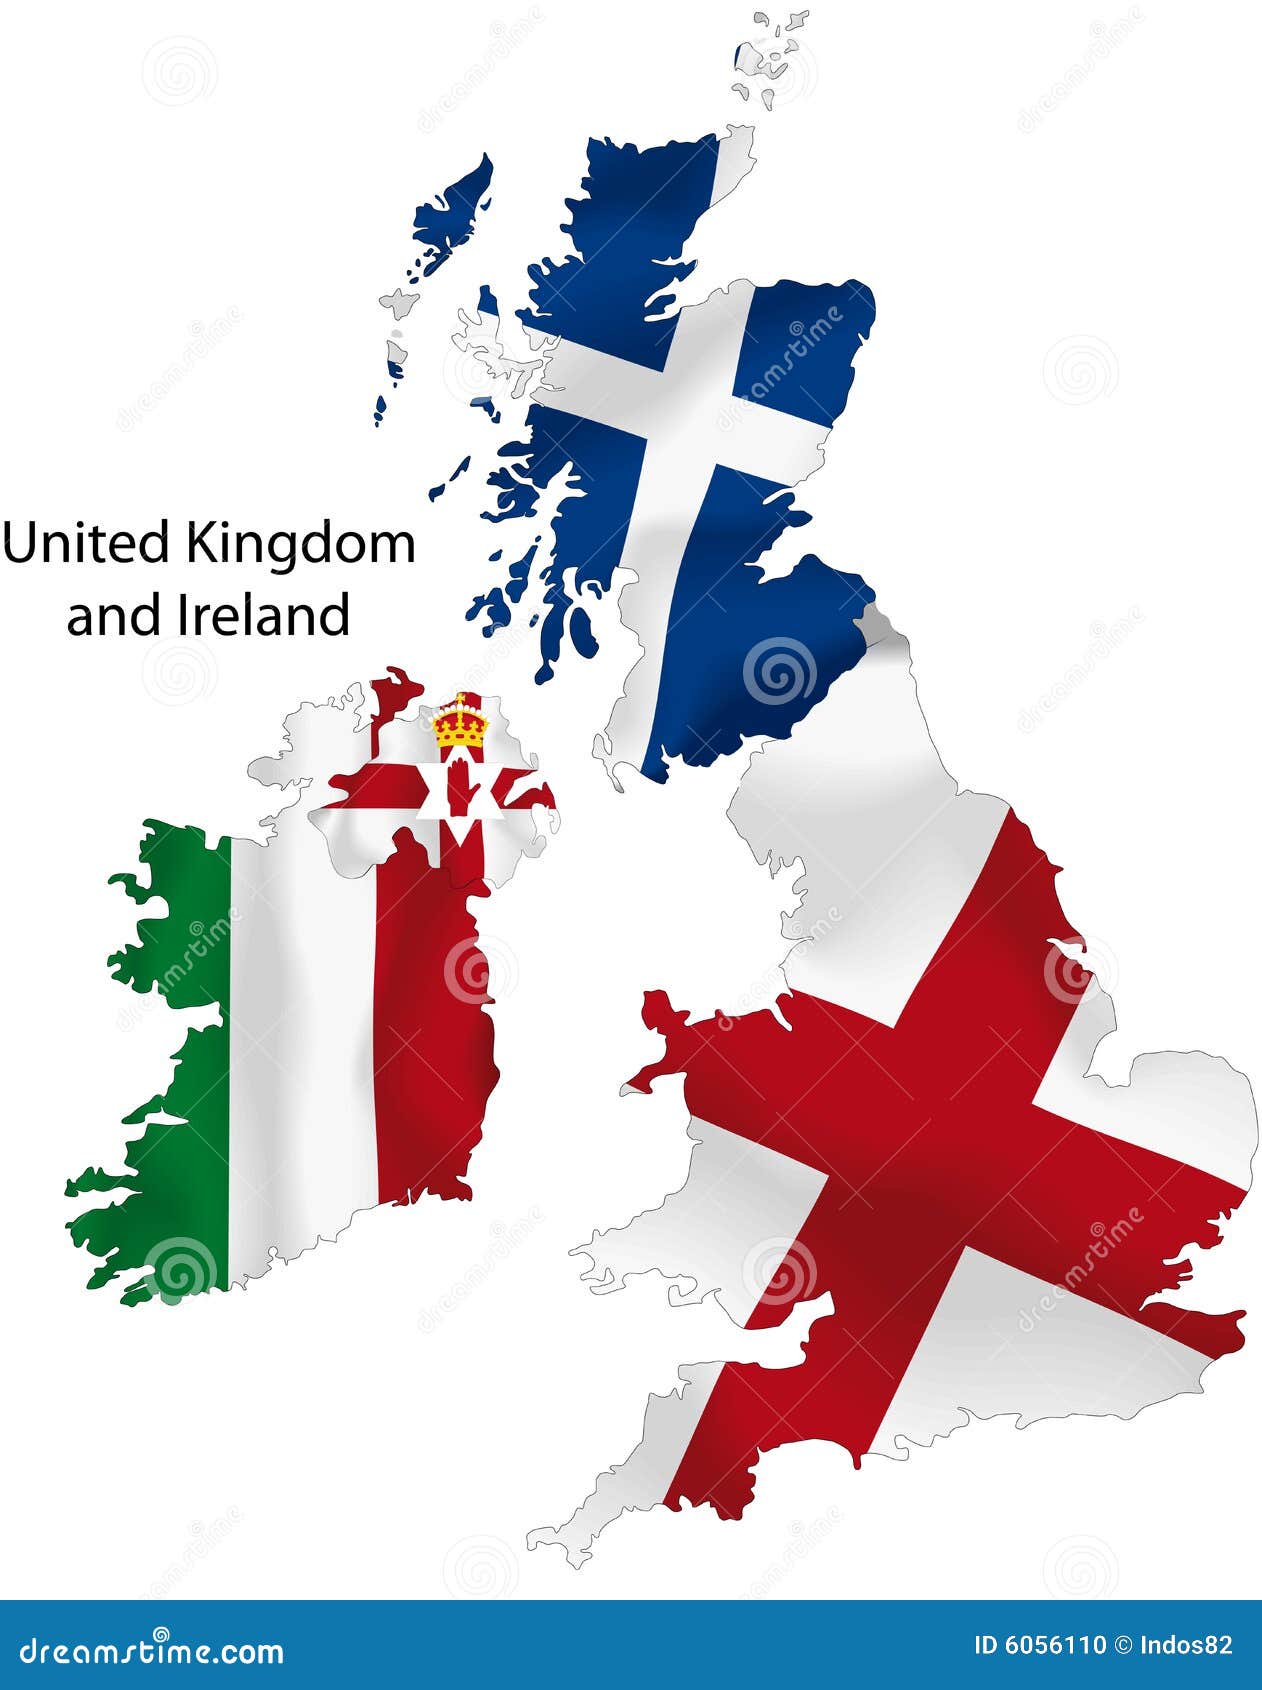 clipart map of uk and ireland - photo #46